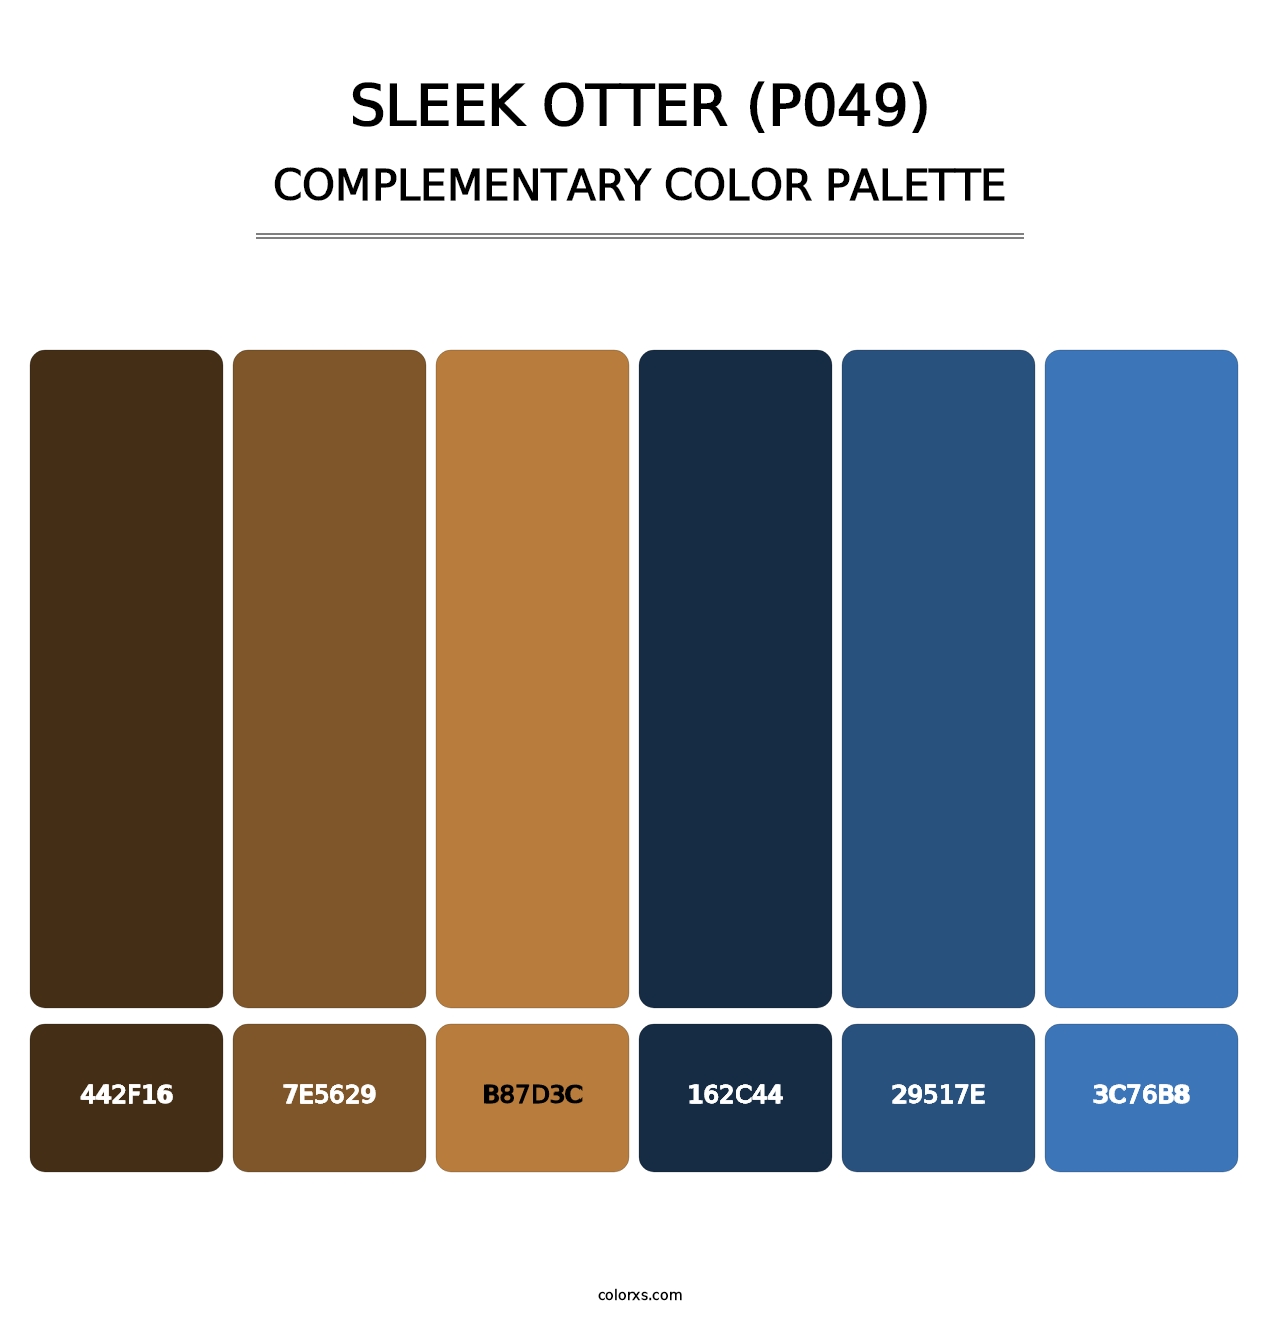 Sleek Otter (P049) - Complementary Color Palette